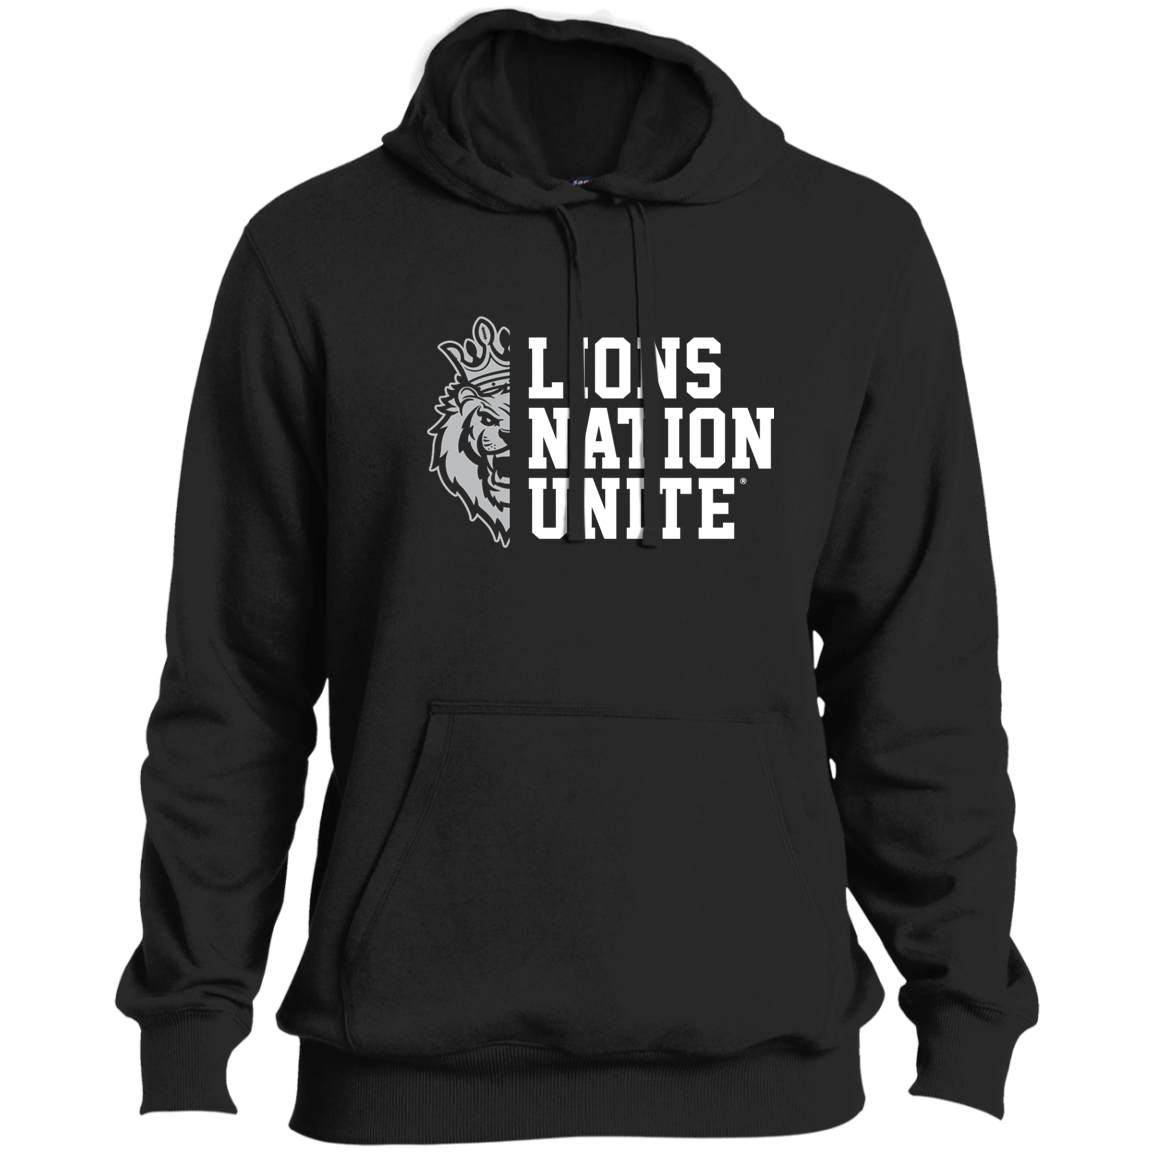 Lions Nation Unite® Tall Pullover Hoodie